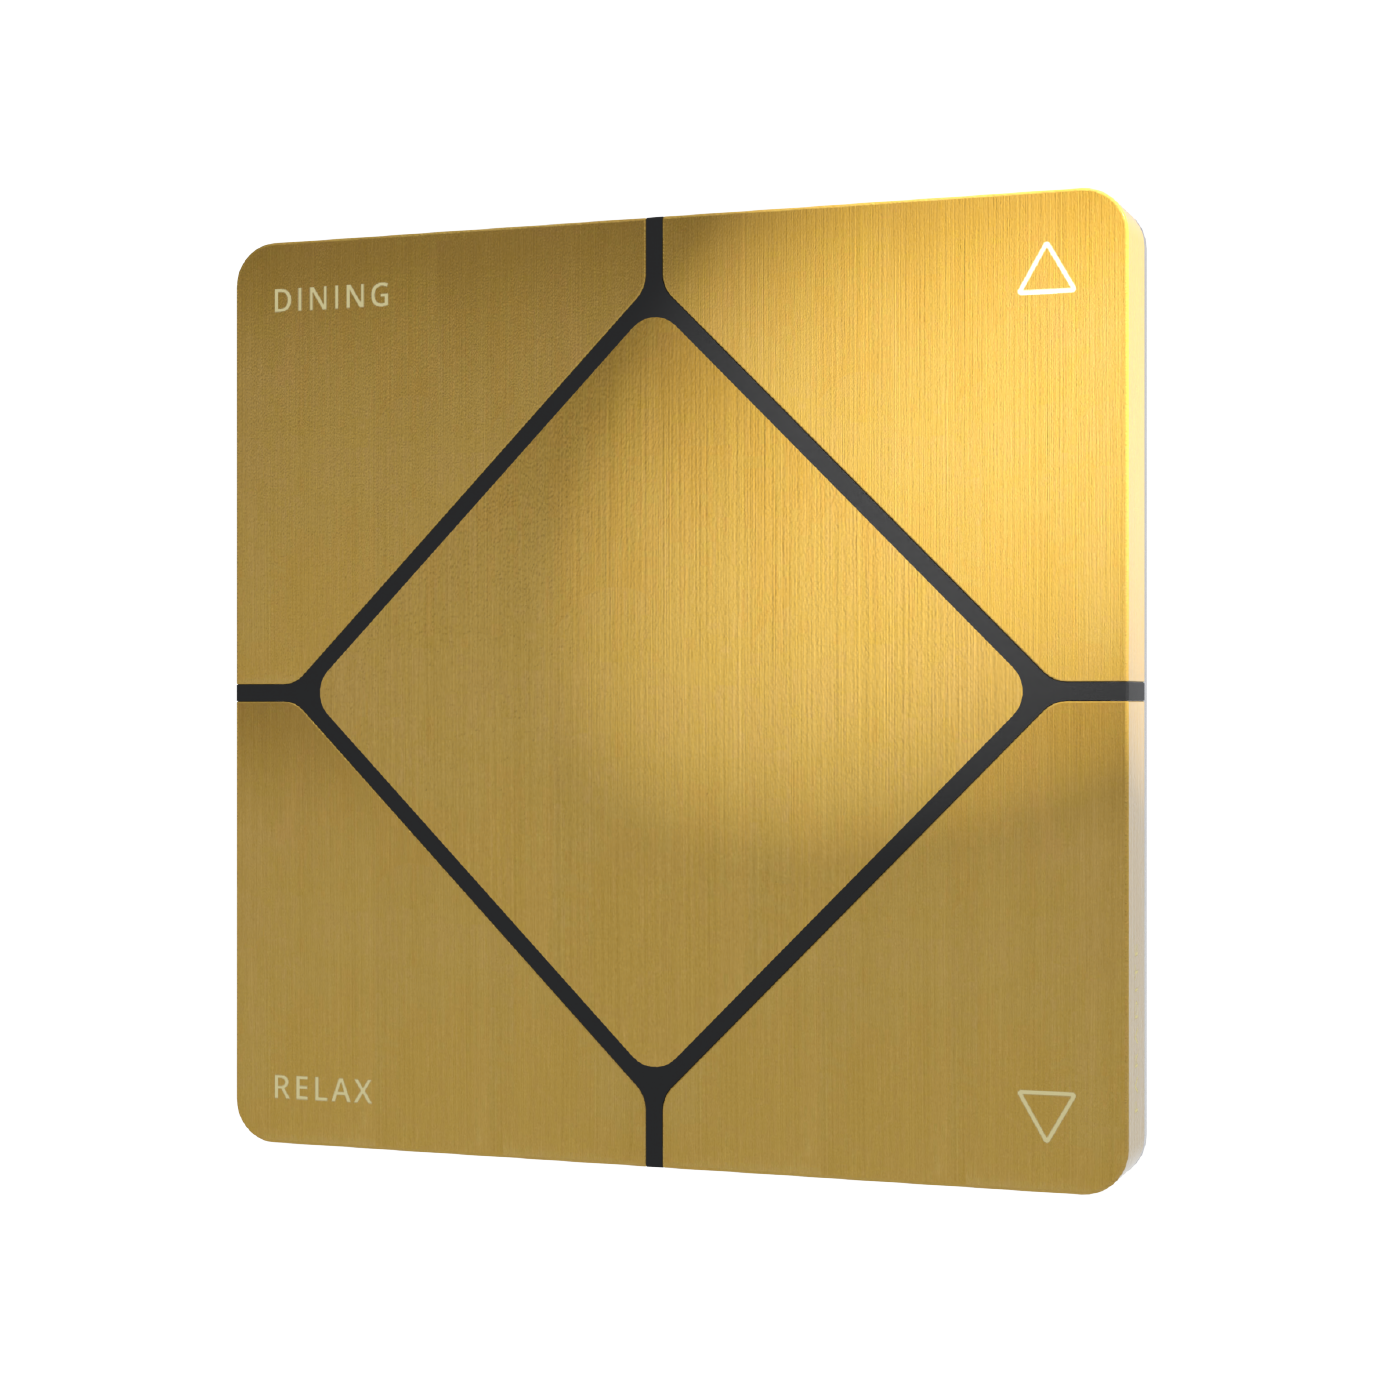 TAP-5 ORE BRUSHED BRASS - KNX